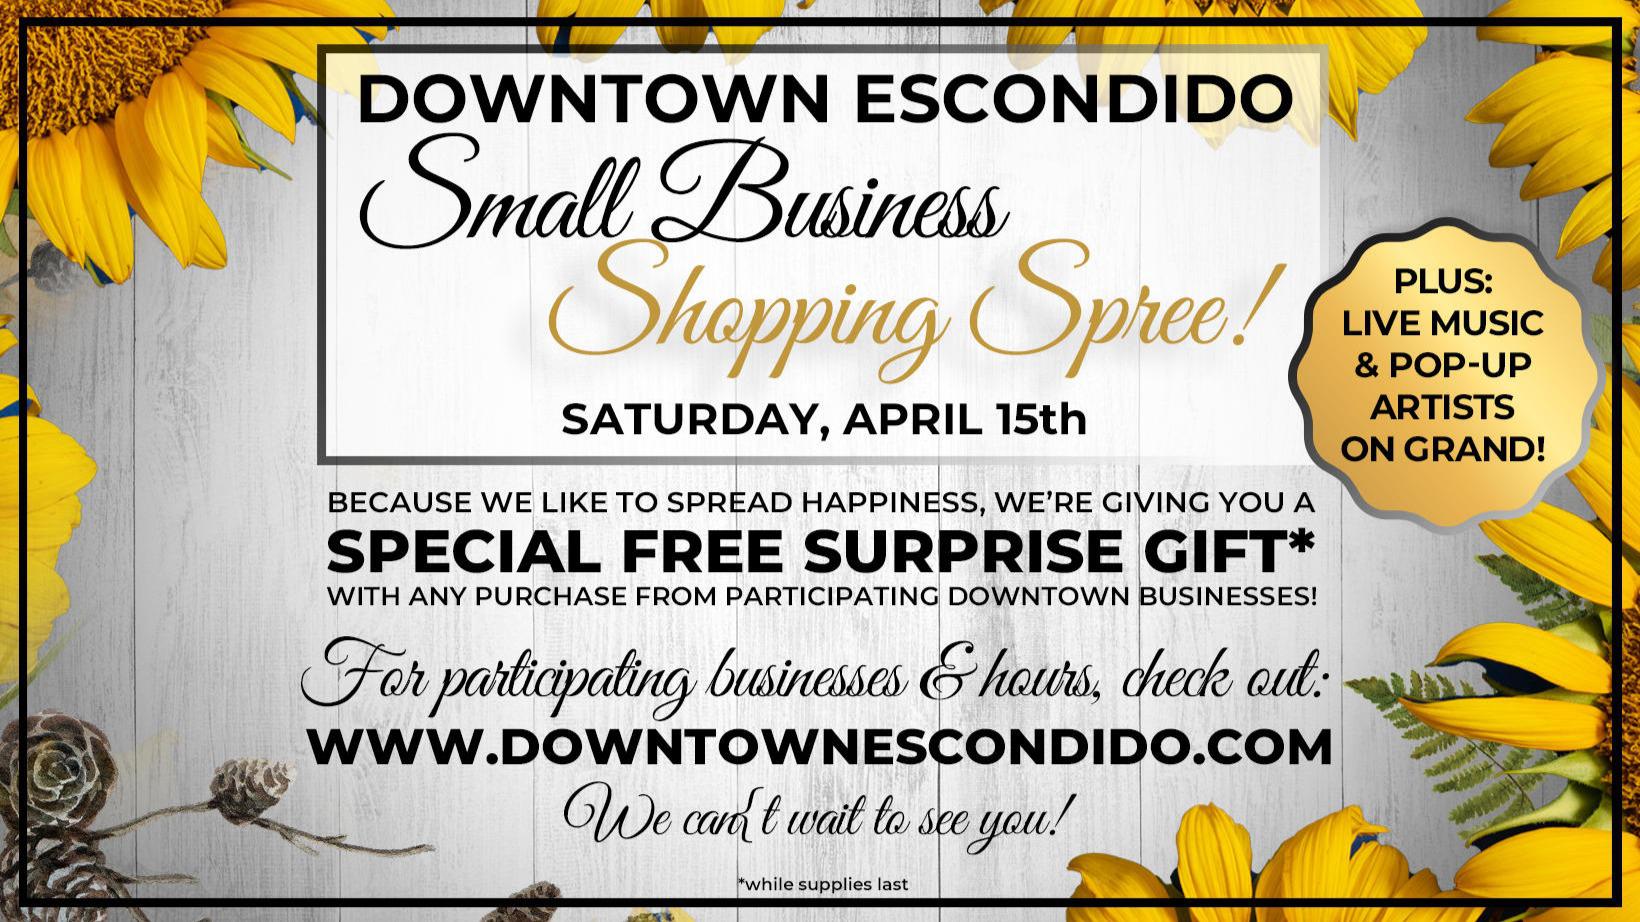 IT'S BACK!! Small Business Saturday, SPRING EDITION! SAVE THE DATE for this special event: Saturday, April 15! Because we like to spread happiness, we're giving you a special FREE surprise gift from a downtown business! (While supplies last). Find pop-up artists, makers, and music on Grand Avenue. Start your Mother's Day shopping early and get free gifts! With purchase, you will receive a SCRATCH-OFF CARD. Each card will contain the name of another participating merchant where you may present the scratch-off card and redeem your free gift. Ginger Road Wellness & Spa 146 E Grand Ave Escondido, CA 92025 442-899-8819